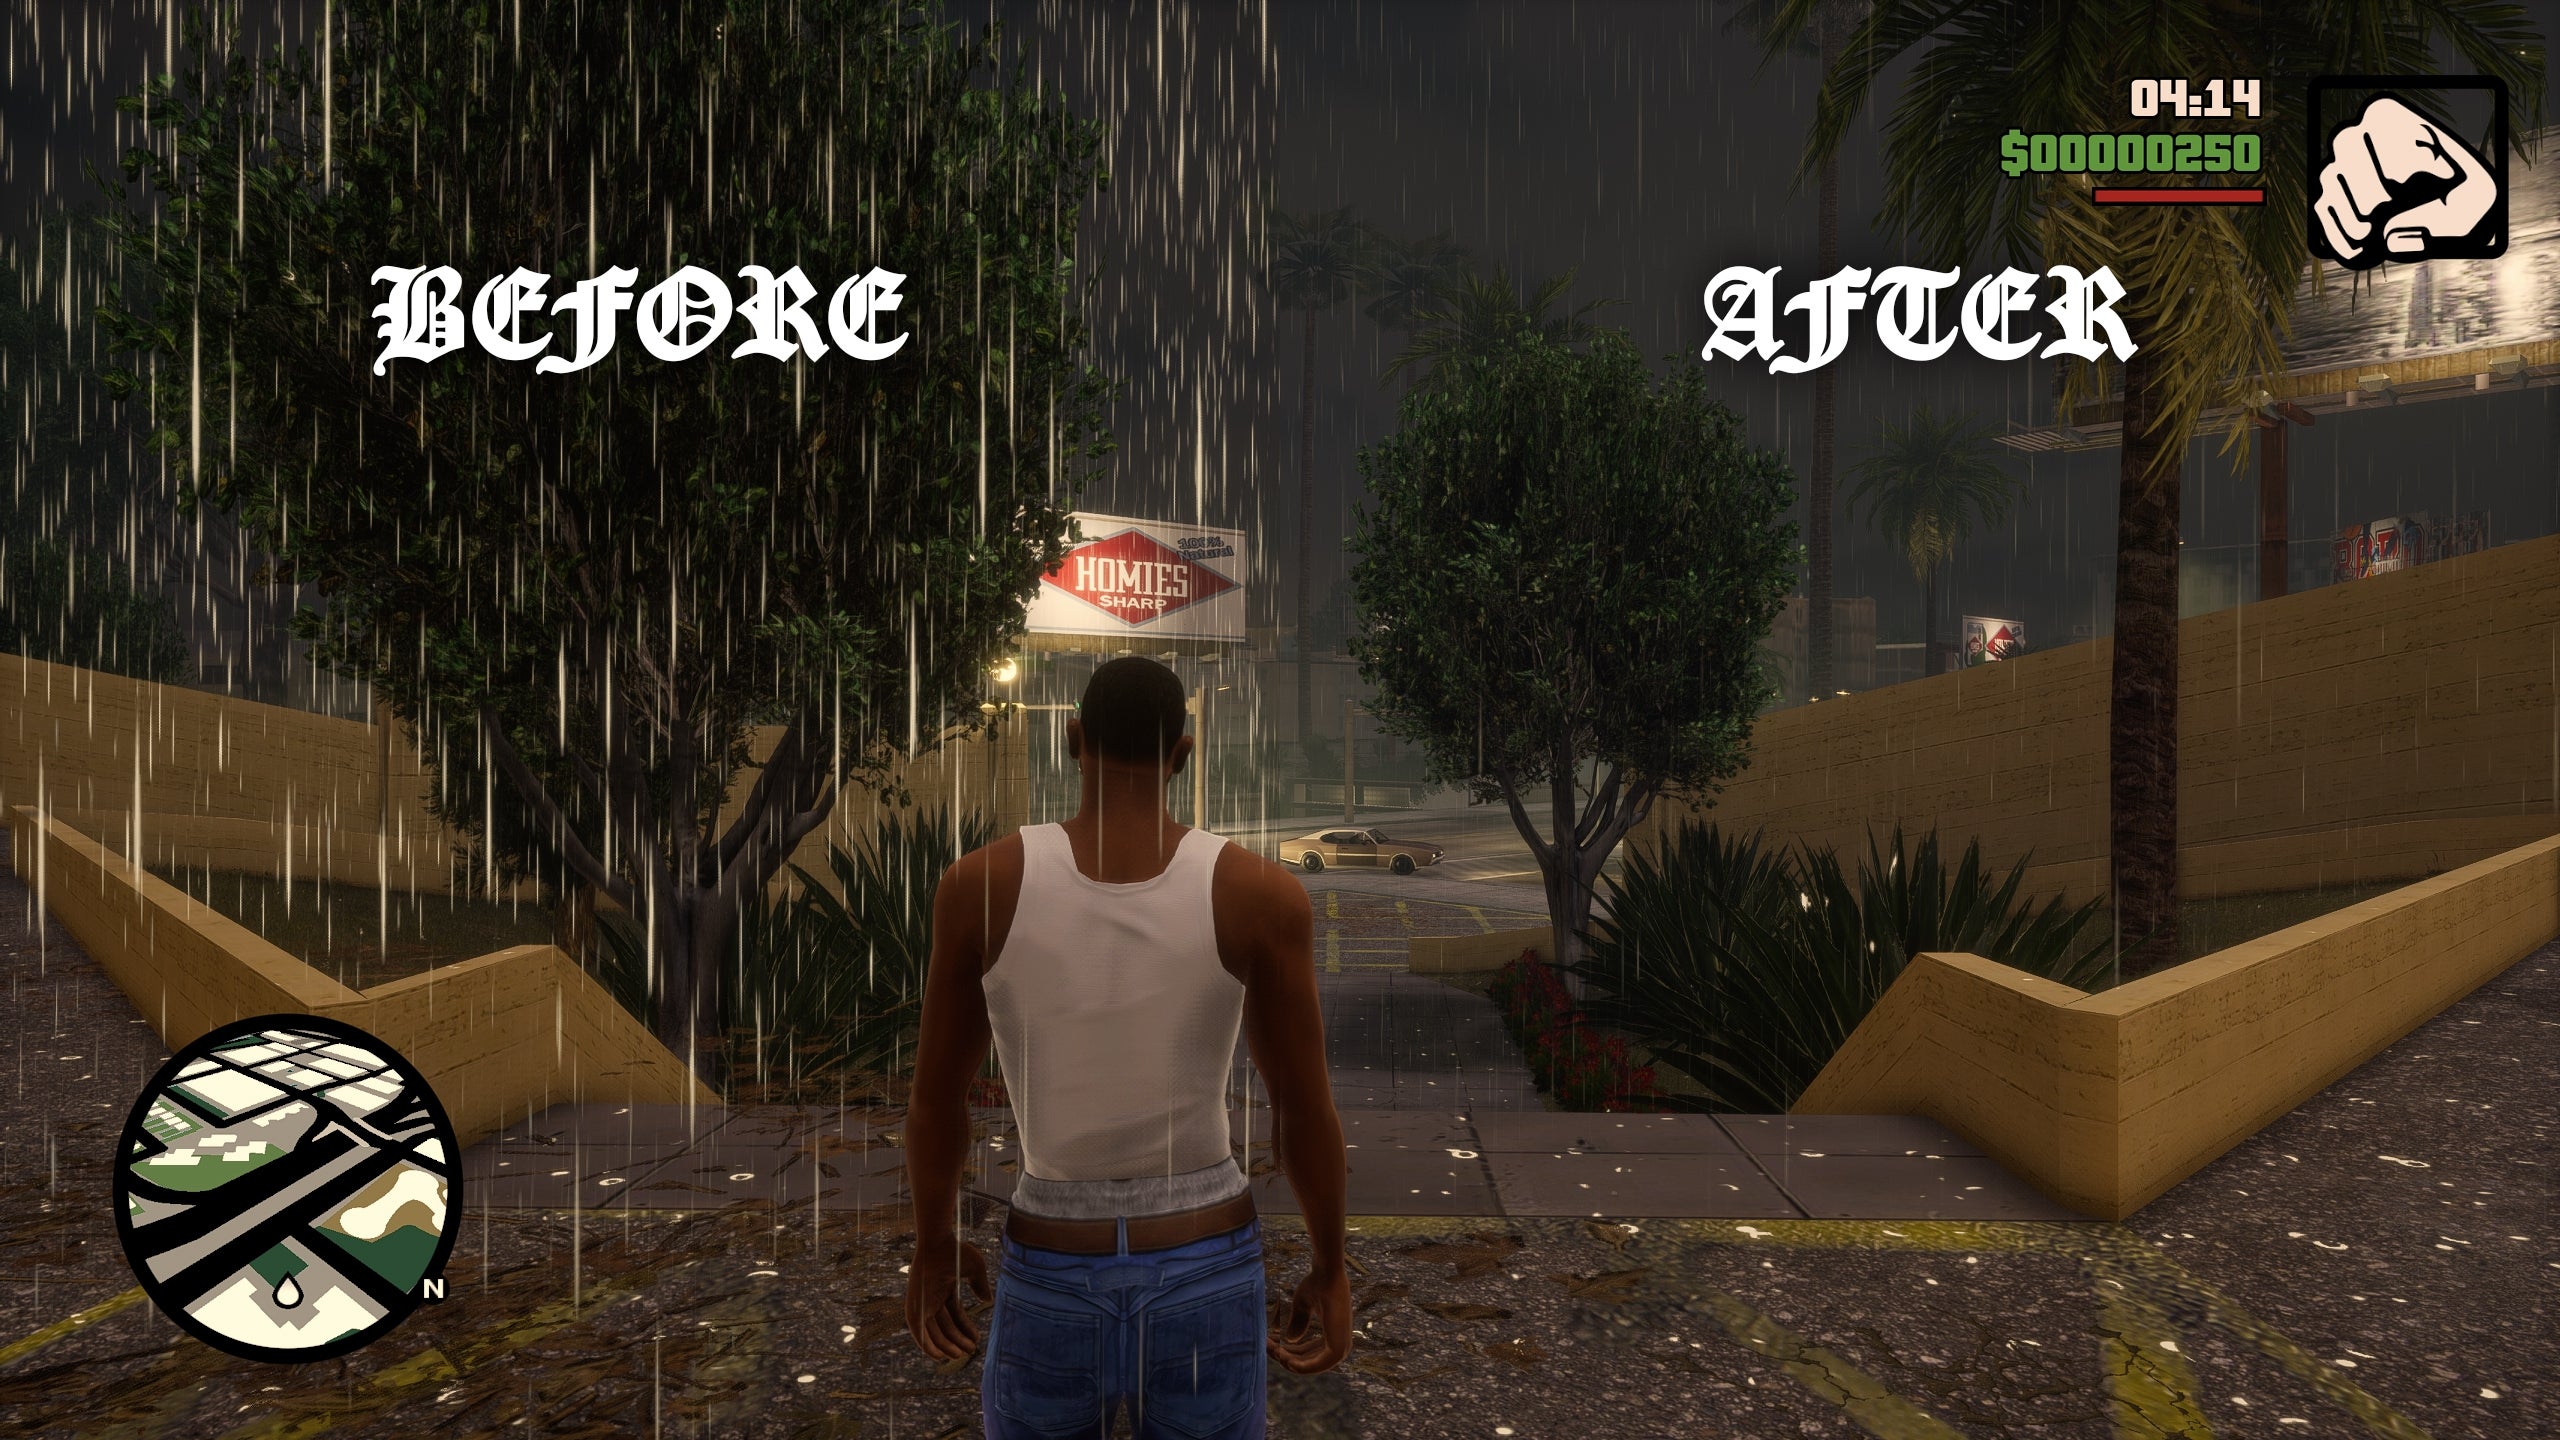 A rain comparison from "GTATrilogyMods" who's made a mod to fix the Definitive Edition's thick rain. Left shows the bad rain, right shows the modded, more transparent rain.